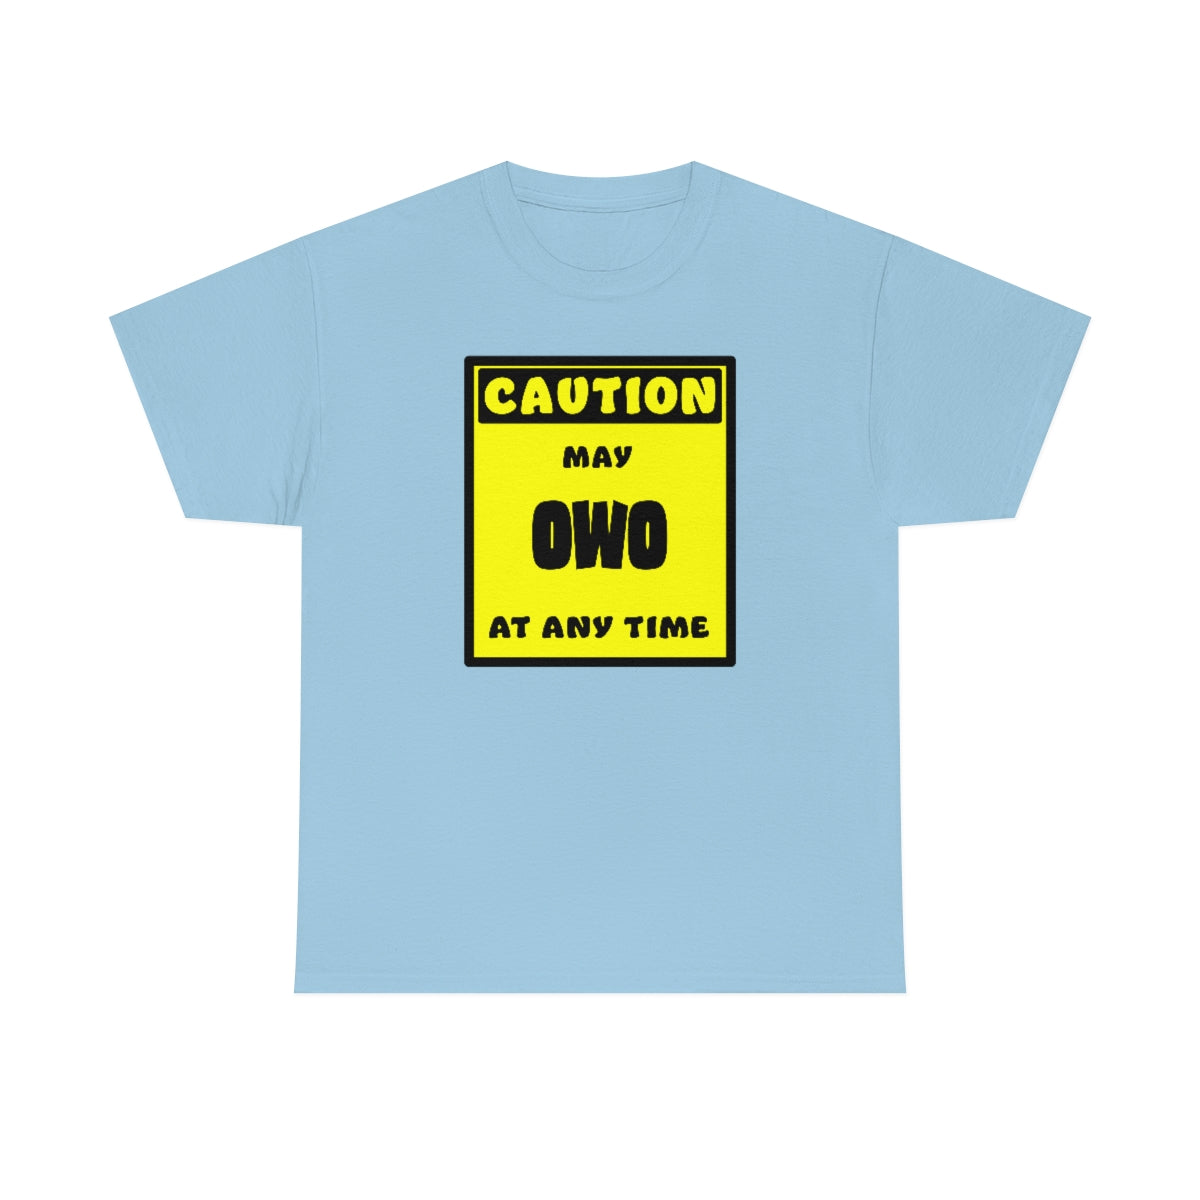 CAUTION! May OWO at any time! - T-Shirt T-Shirt AFLT-Whootorca Light Blue S 